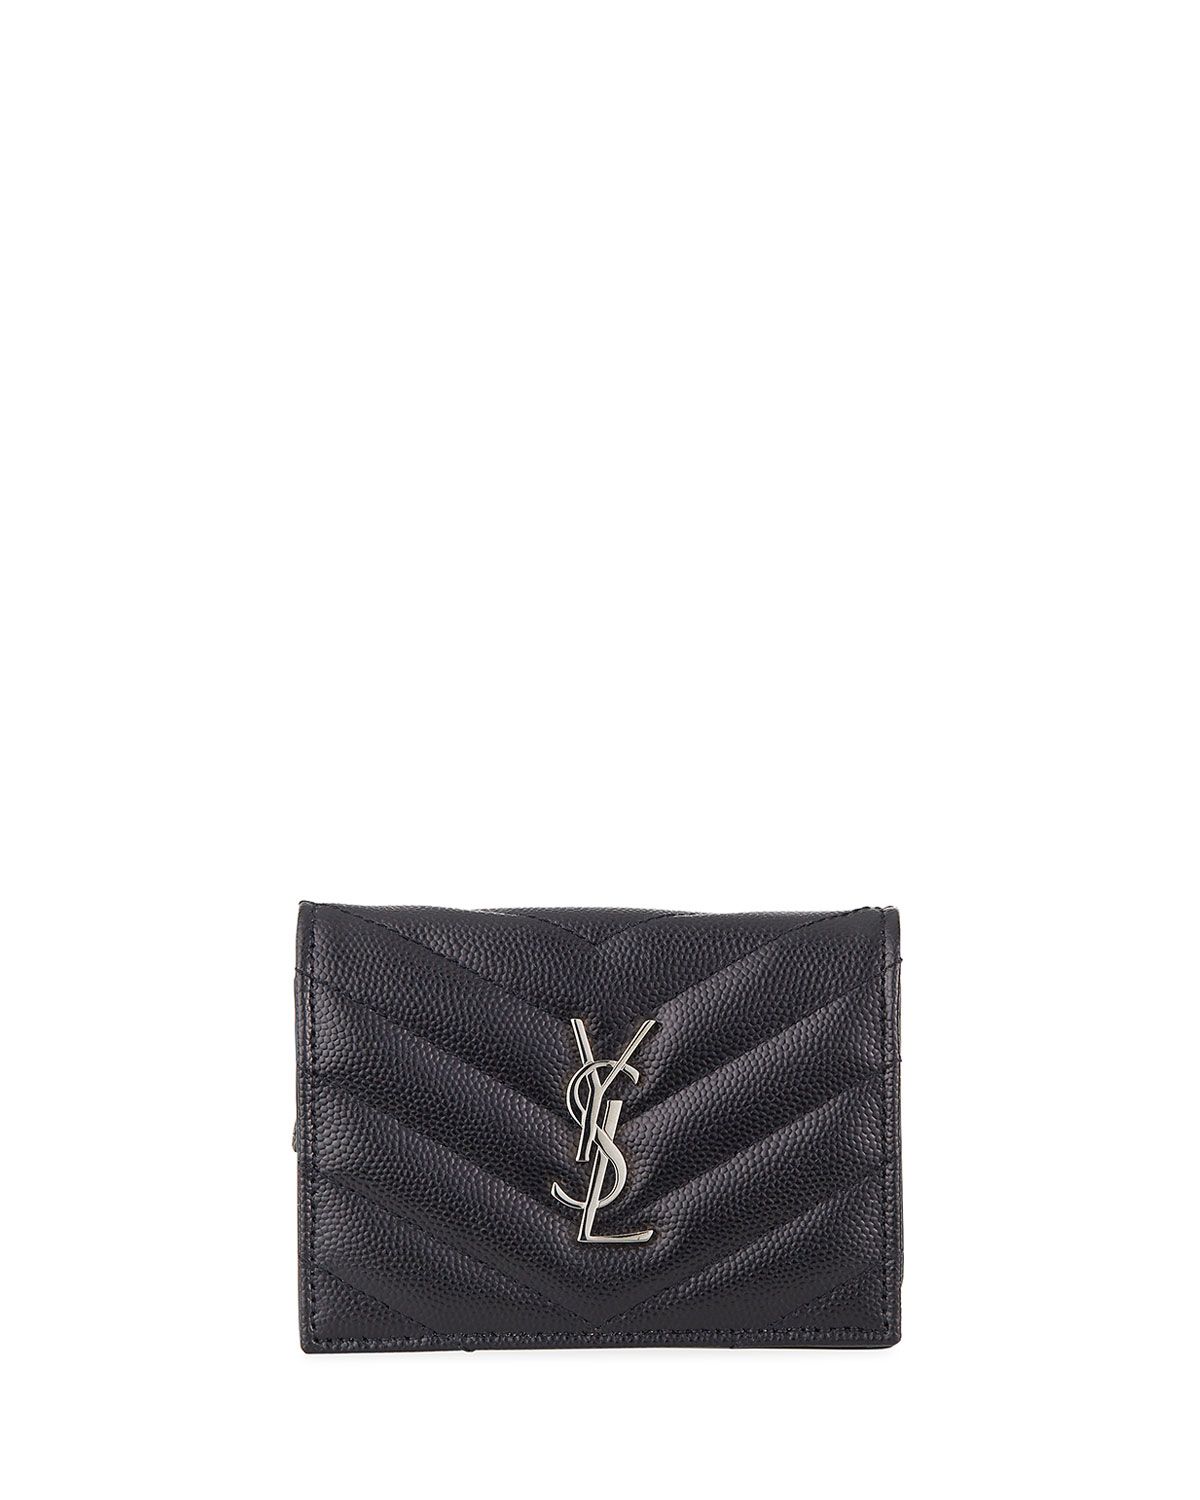 YSL Monogram Quilted Leather Card Case | Neiman Marcus